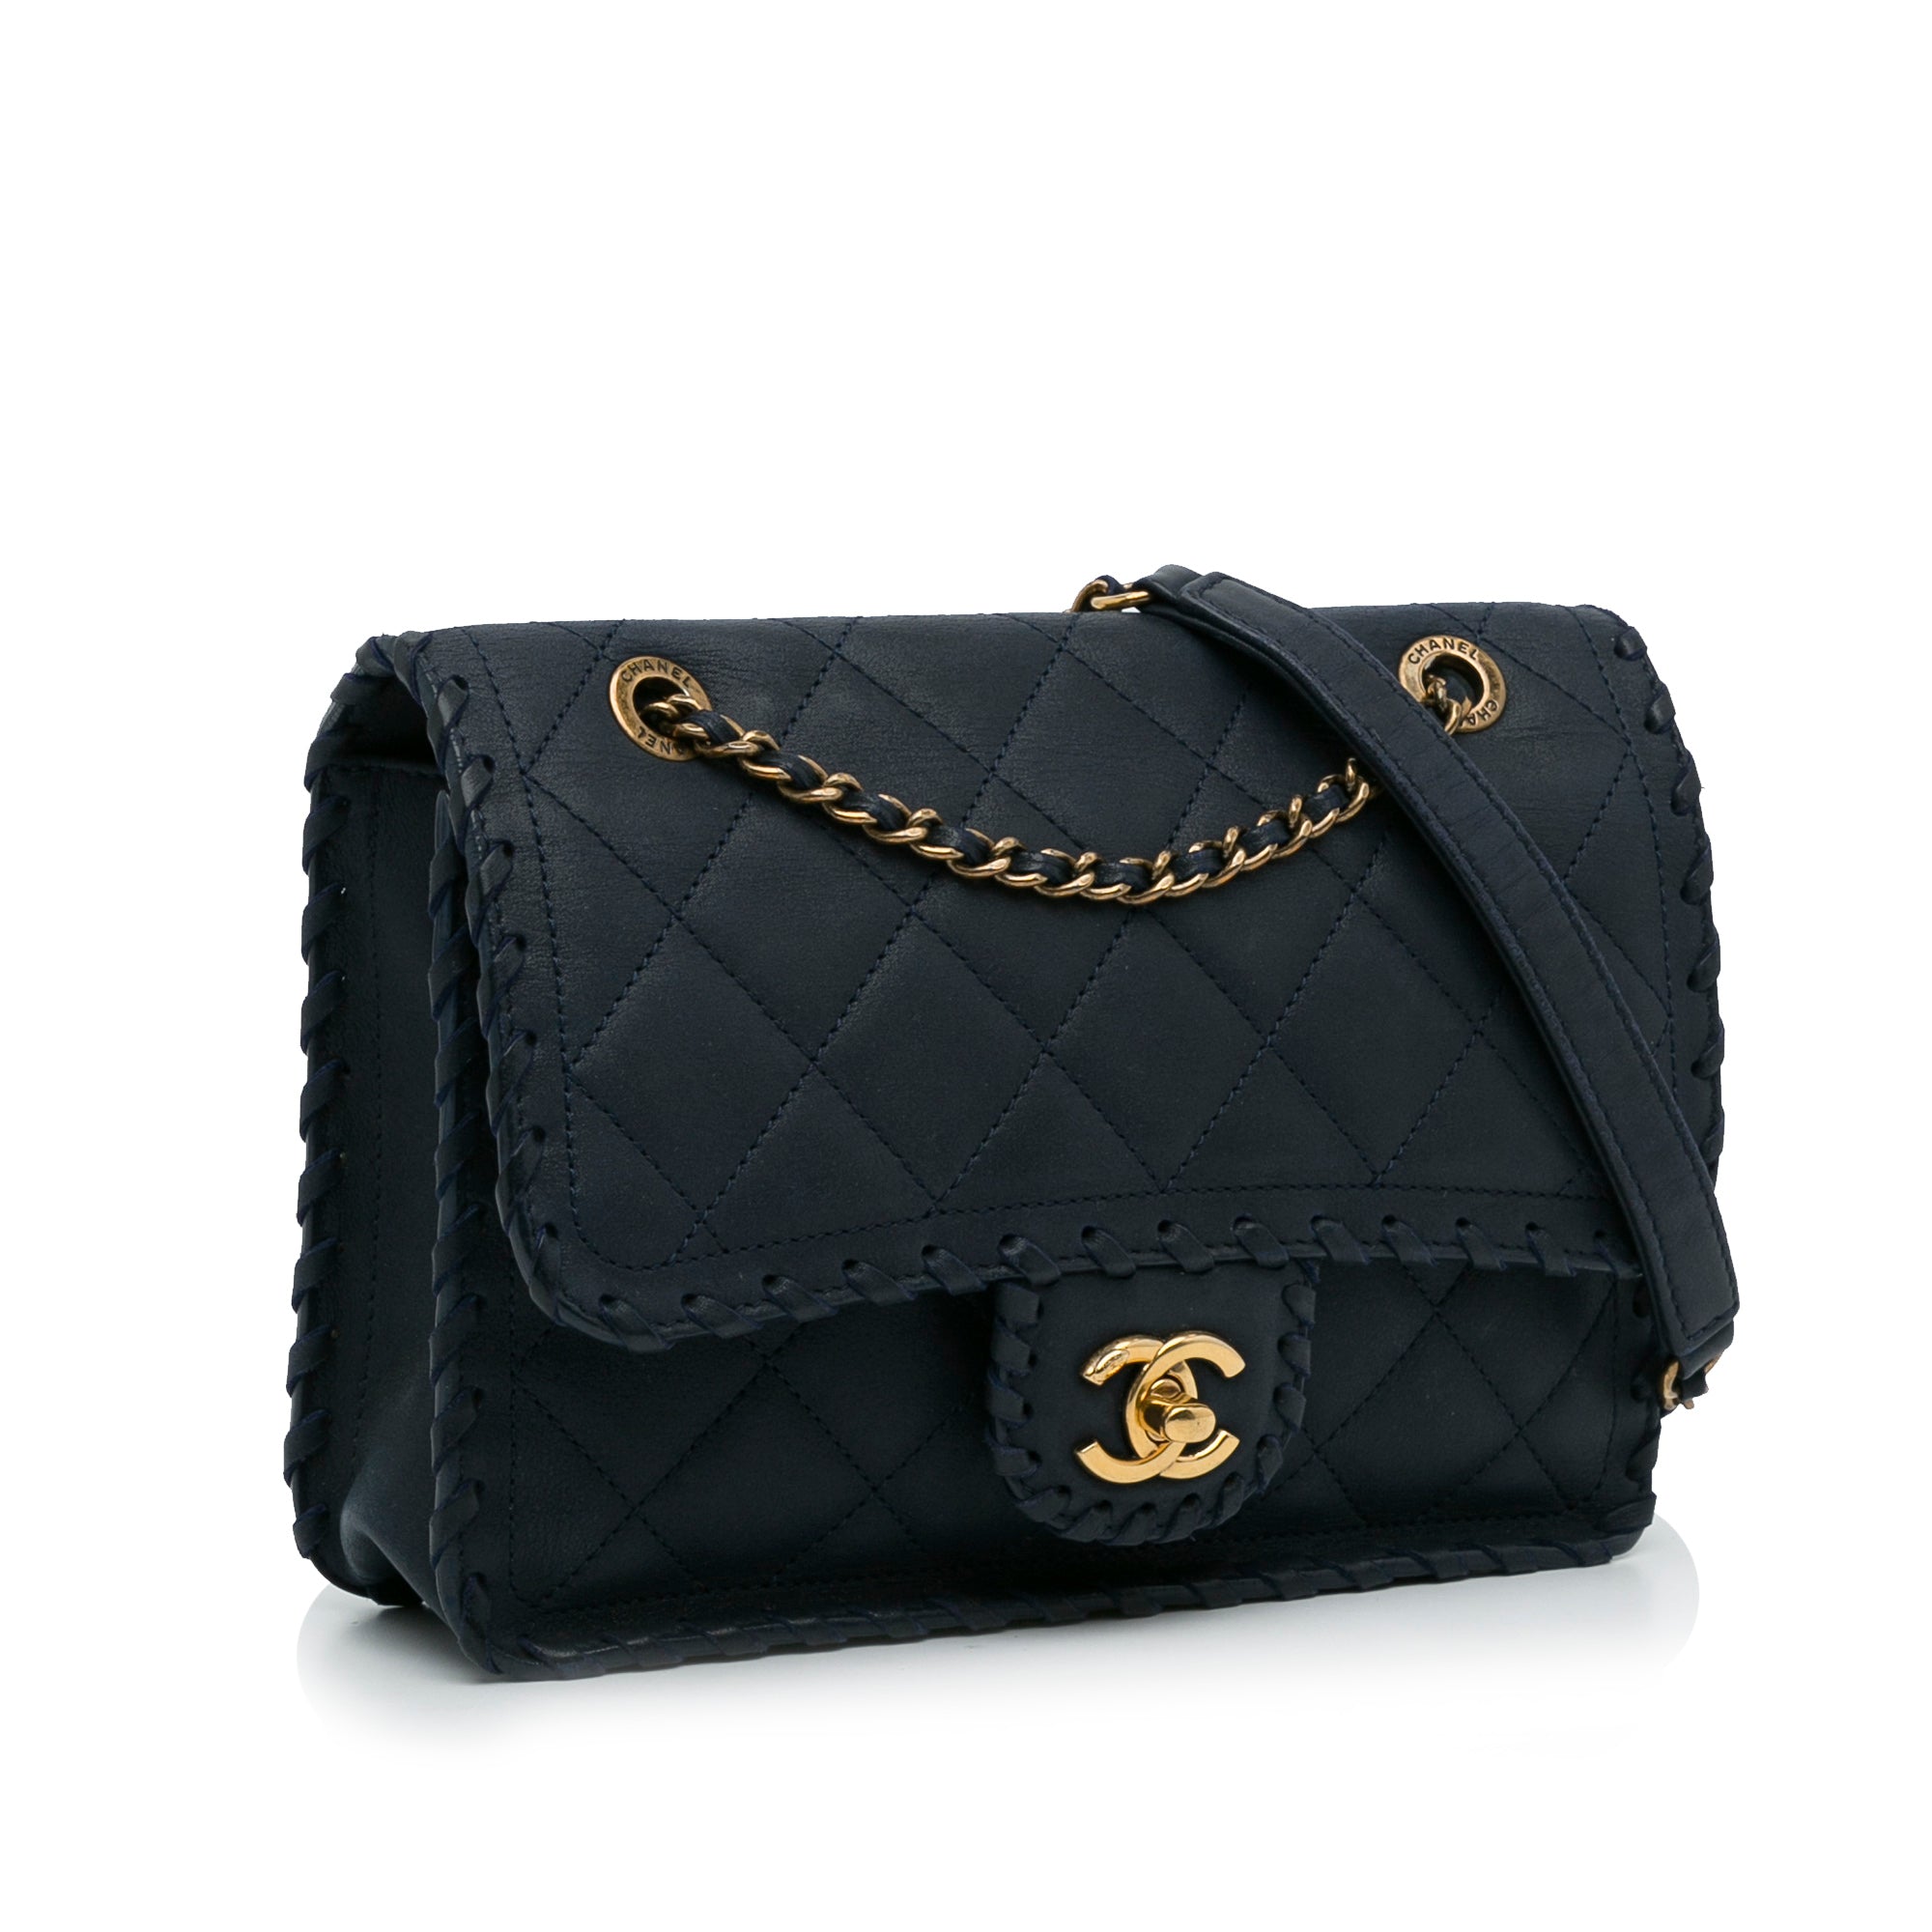 Authentic Chanel Gabrielle Bag Review /Dark Blue Real CalfSkin